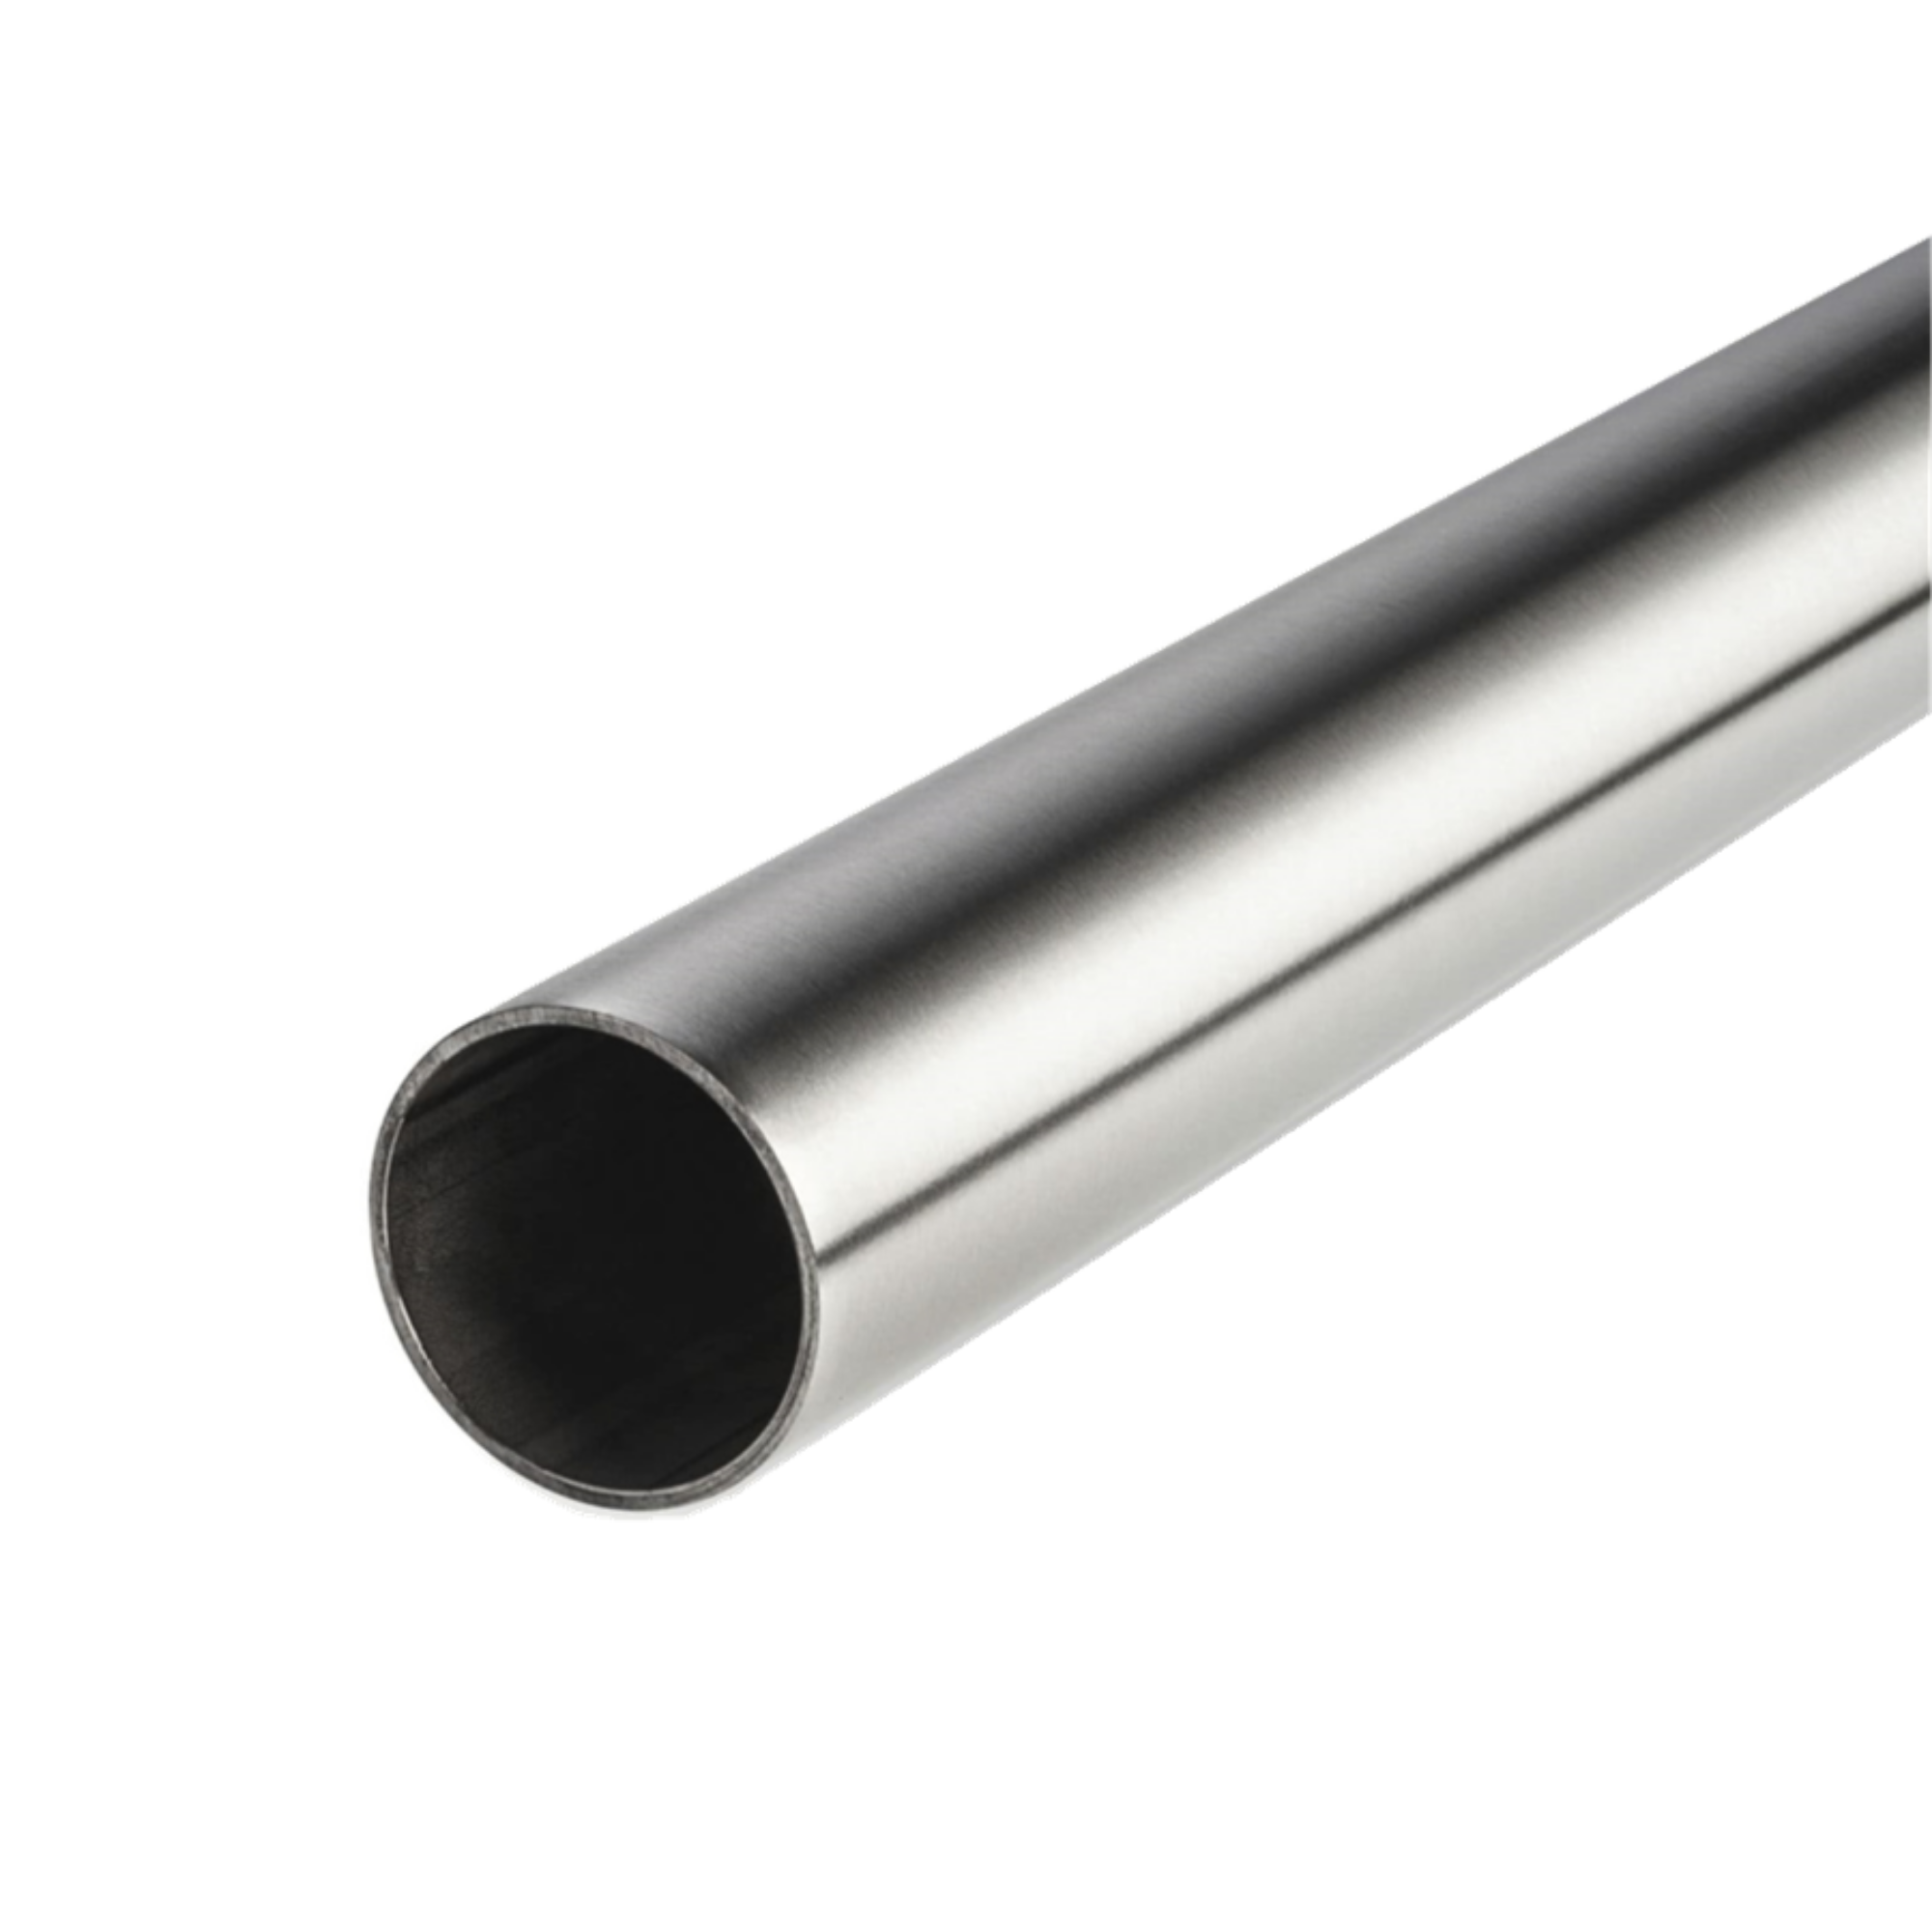 2 inch 201 seamless stainless steel pipe